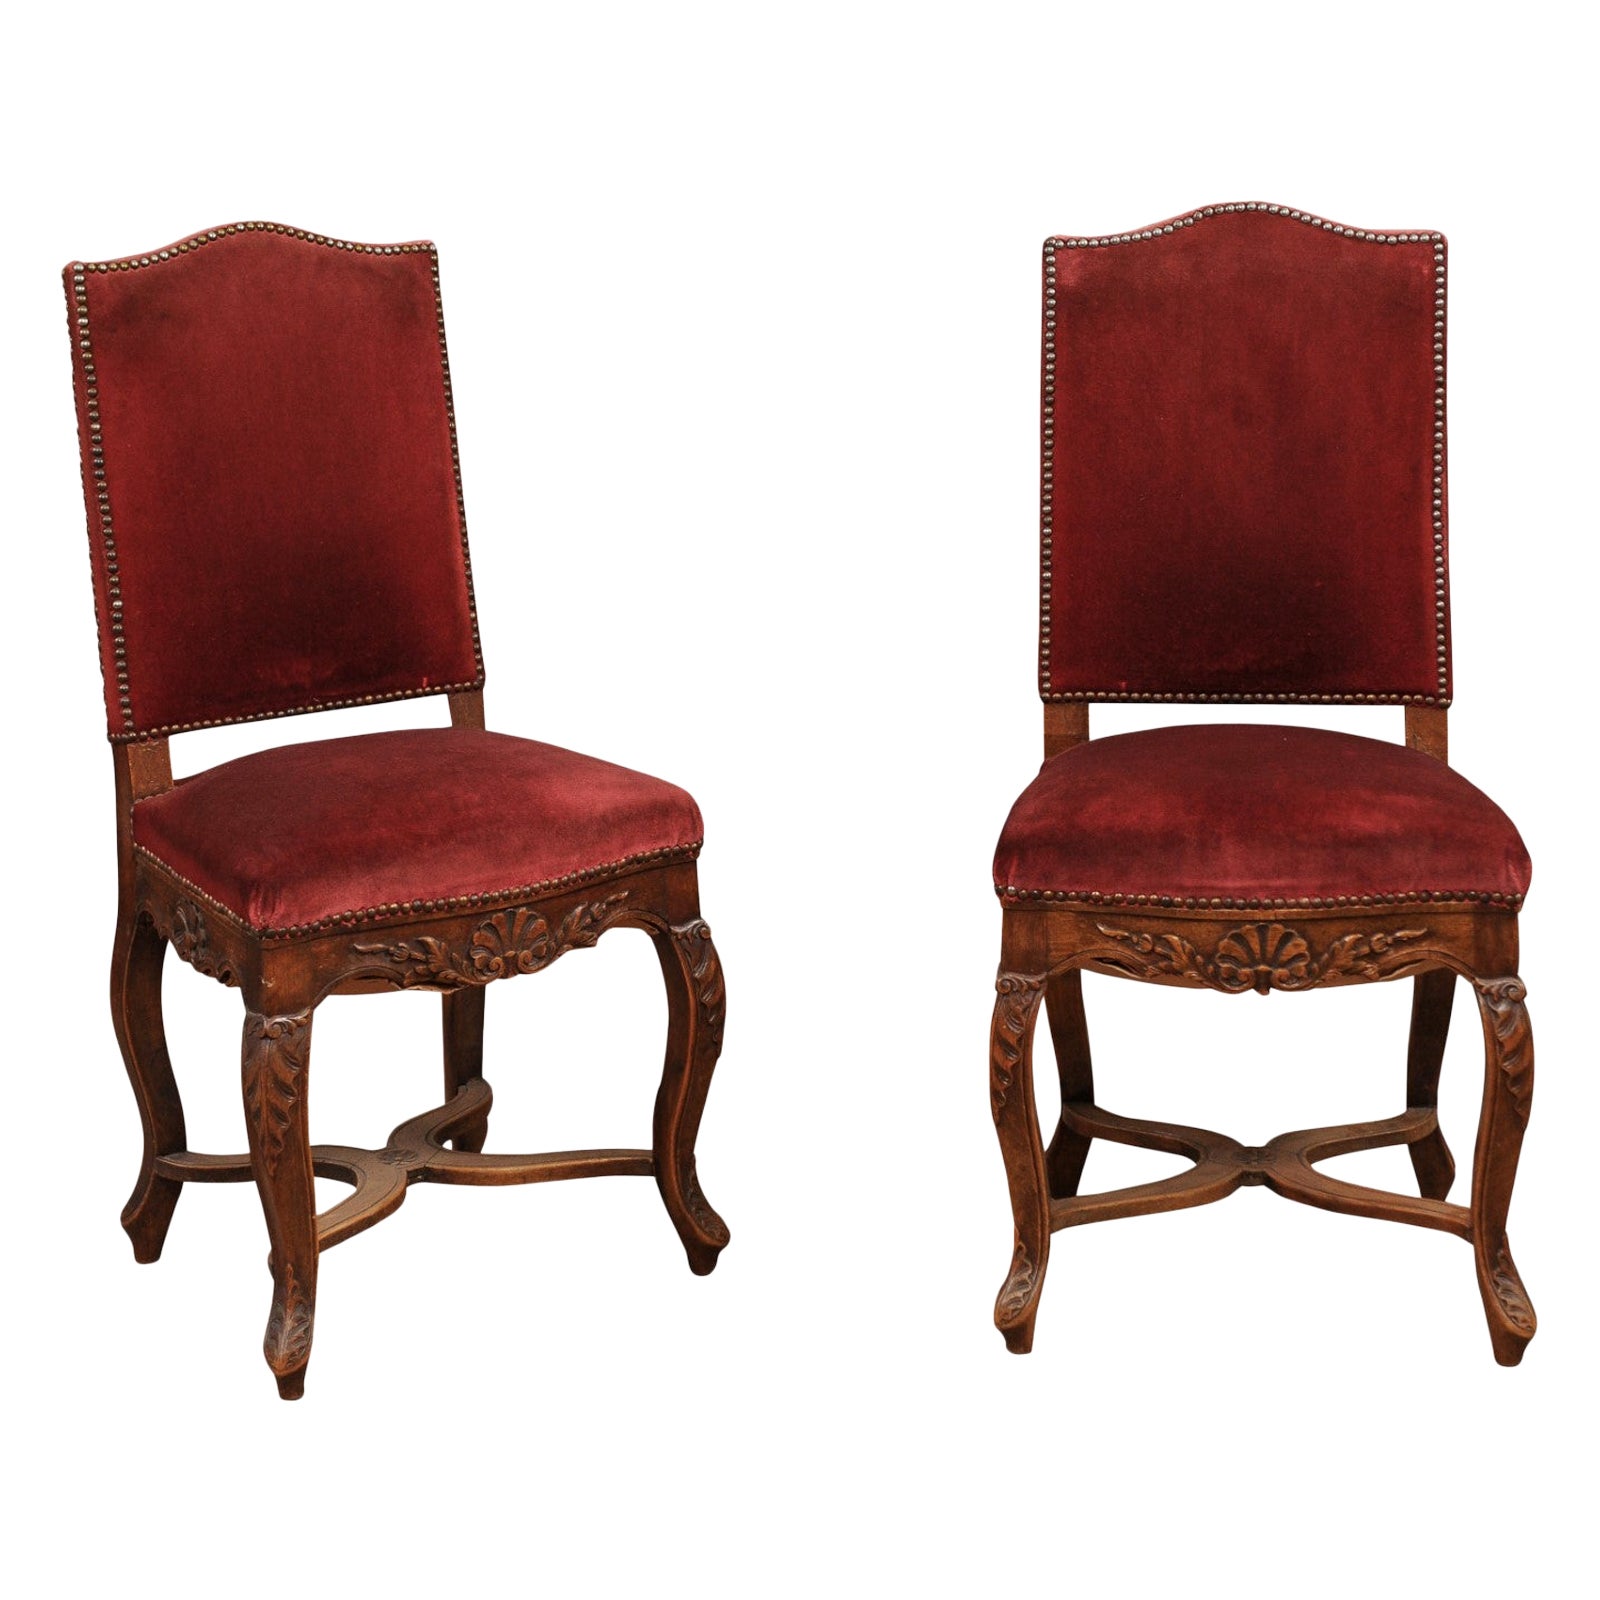 Pair of Louis XV Style Side Chairs with Upholstered Backs, France, ca. 1890